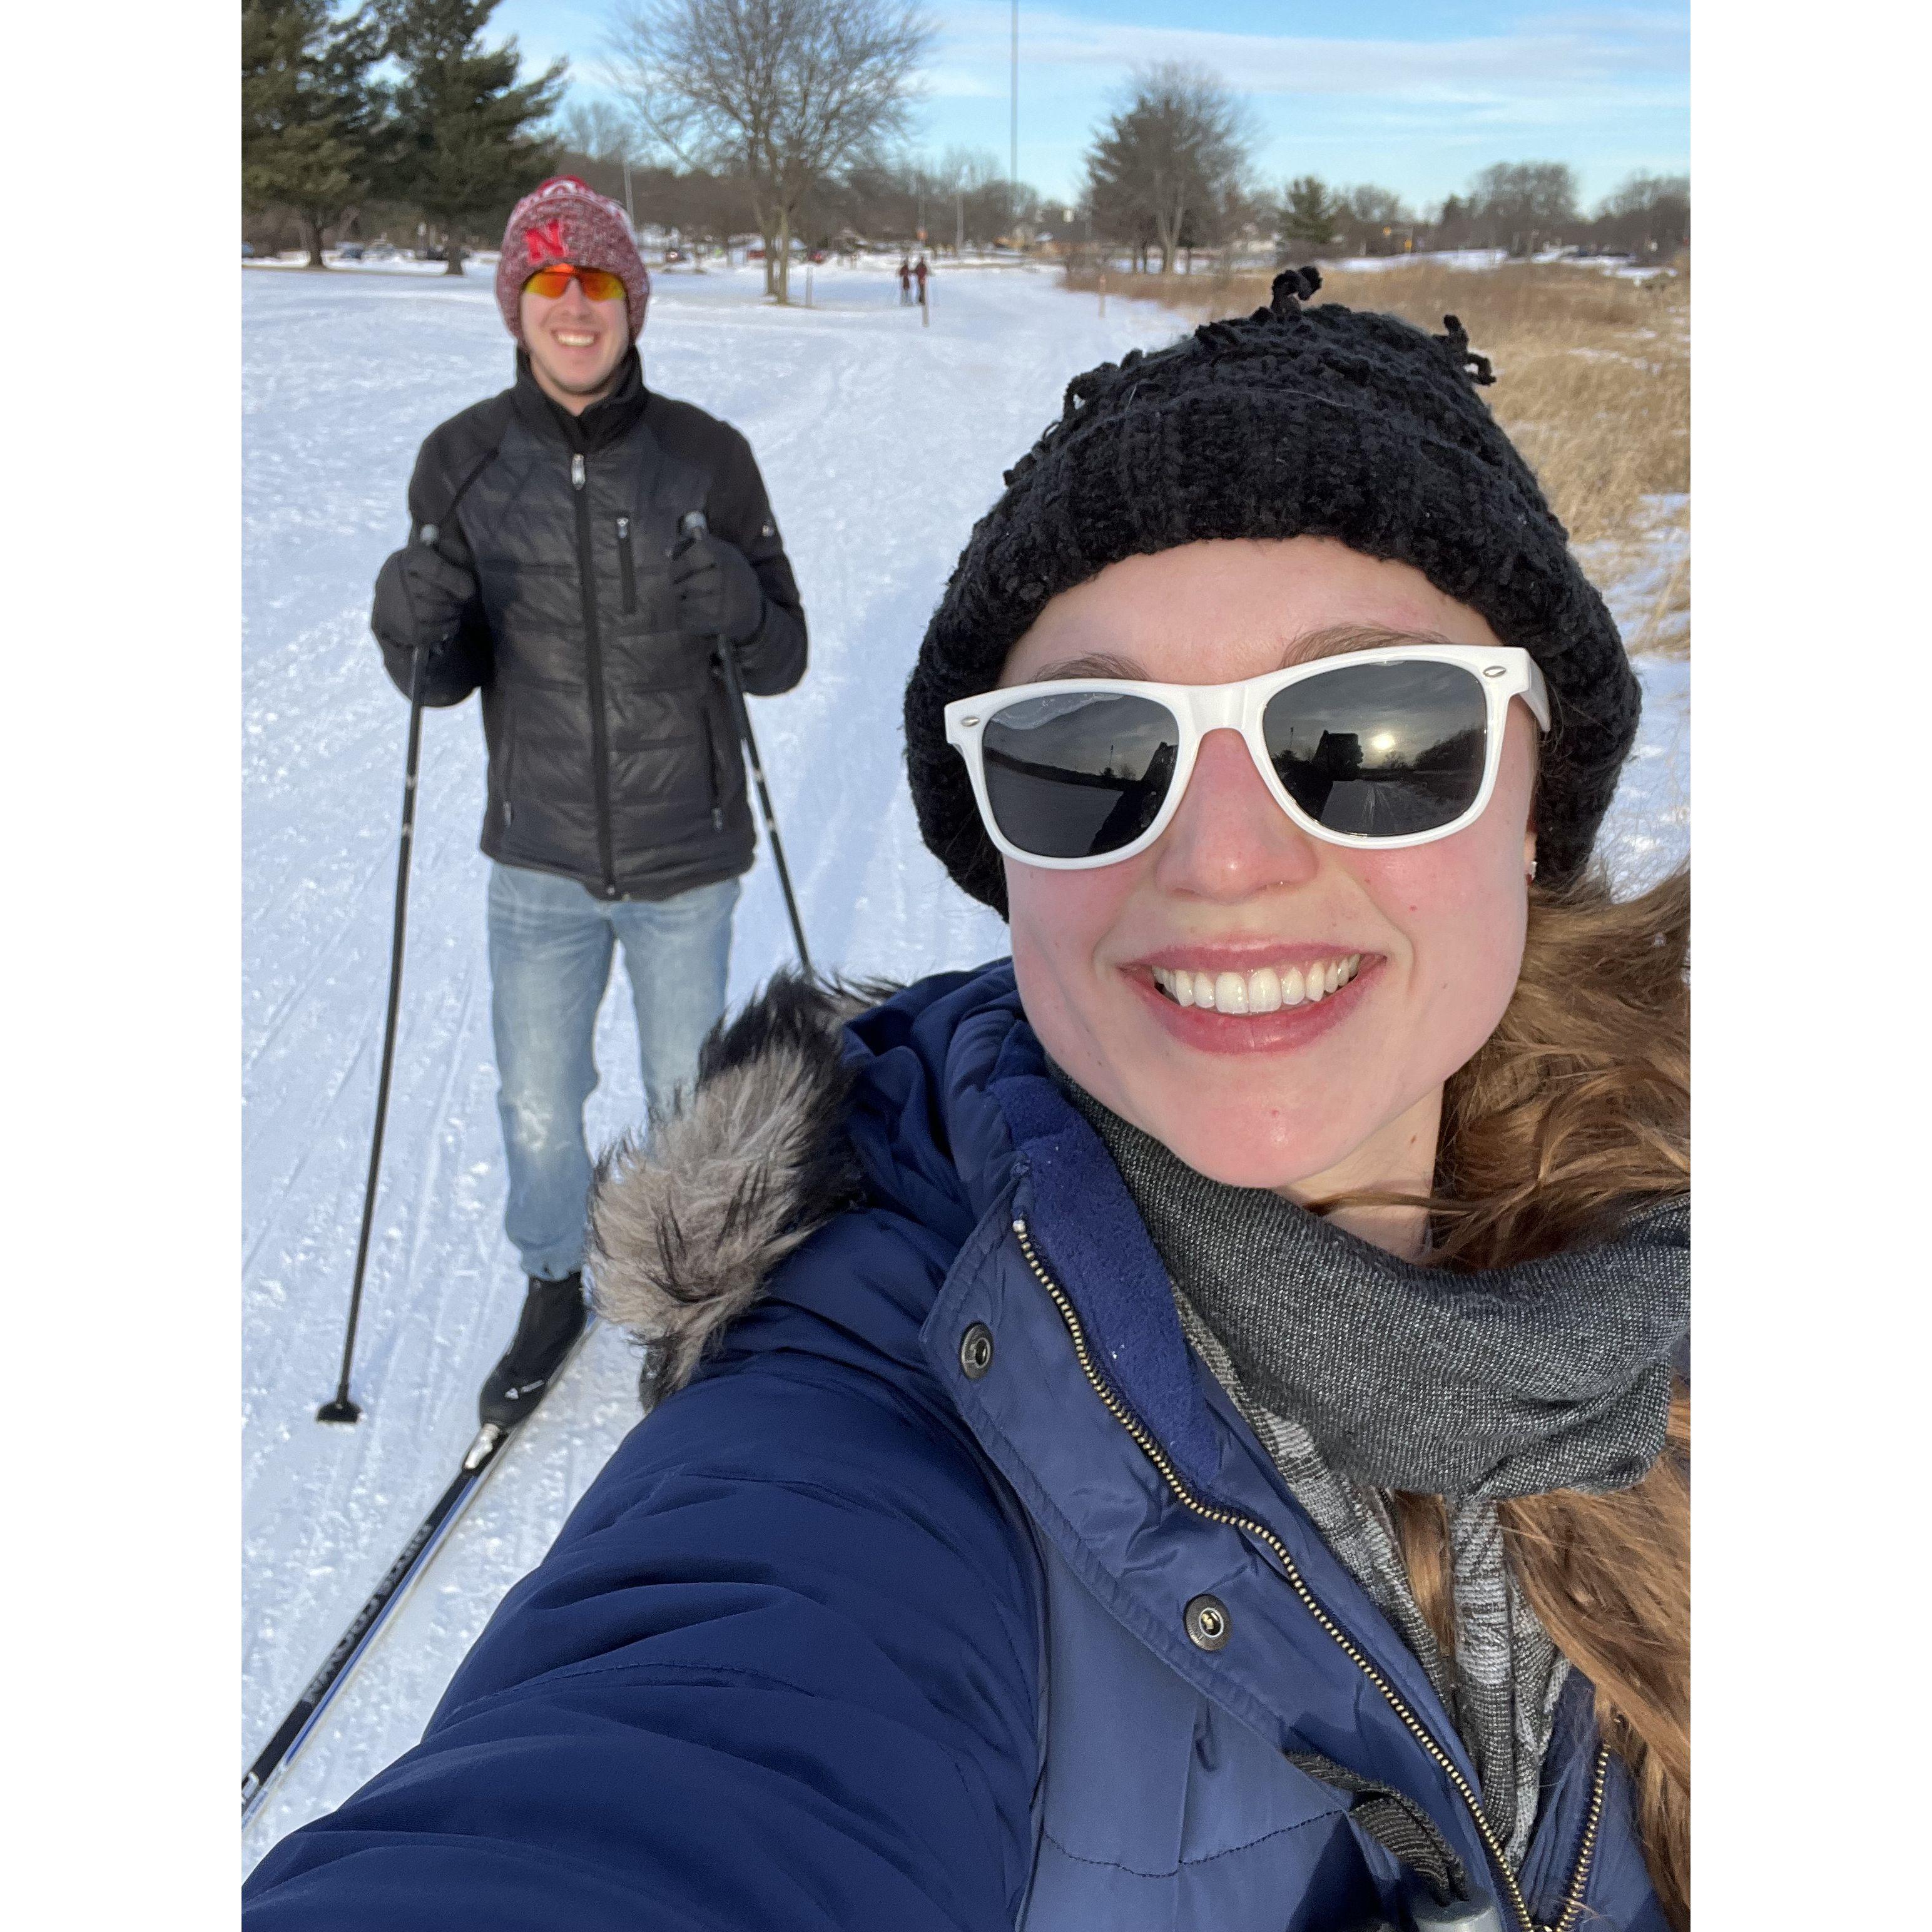 Learning to cross-country ski (Carrie struggled)